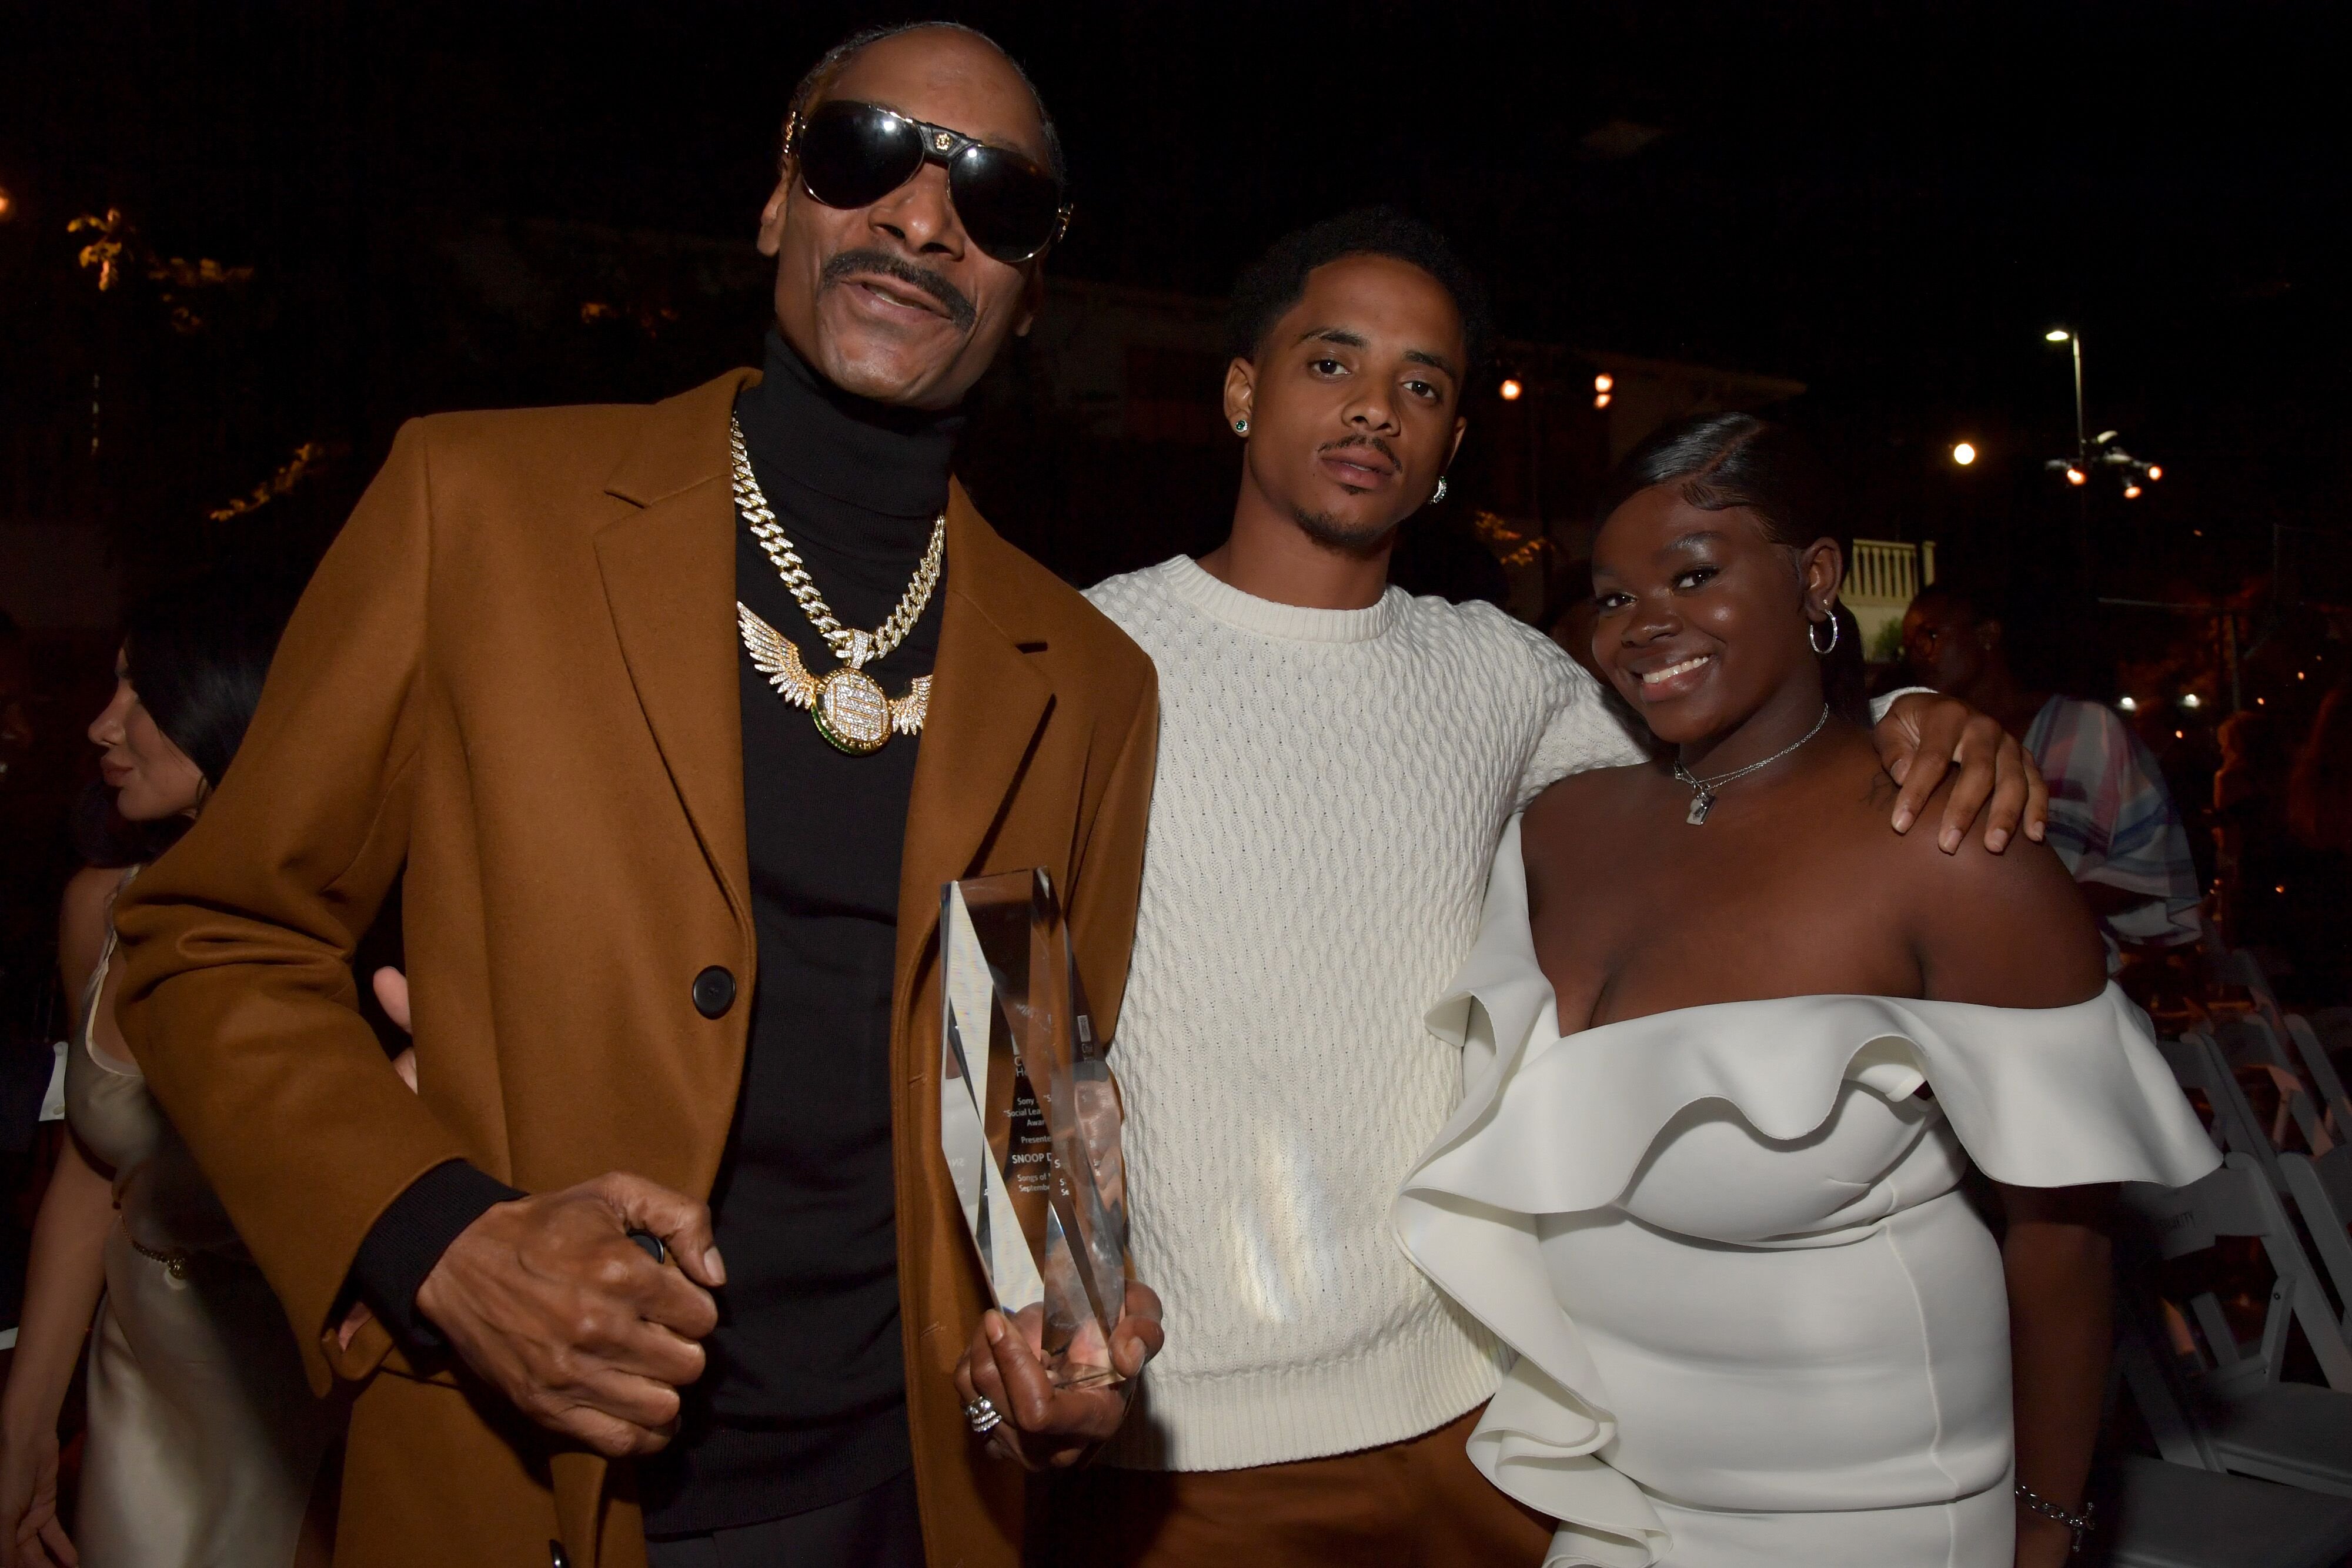 Snoop Dogg and his children at a red carpet event together | Source: Getty Images